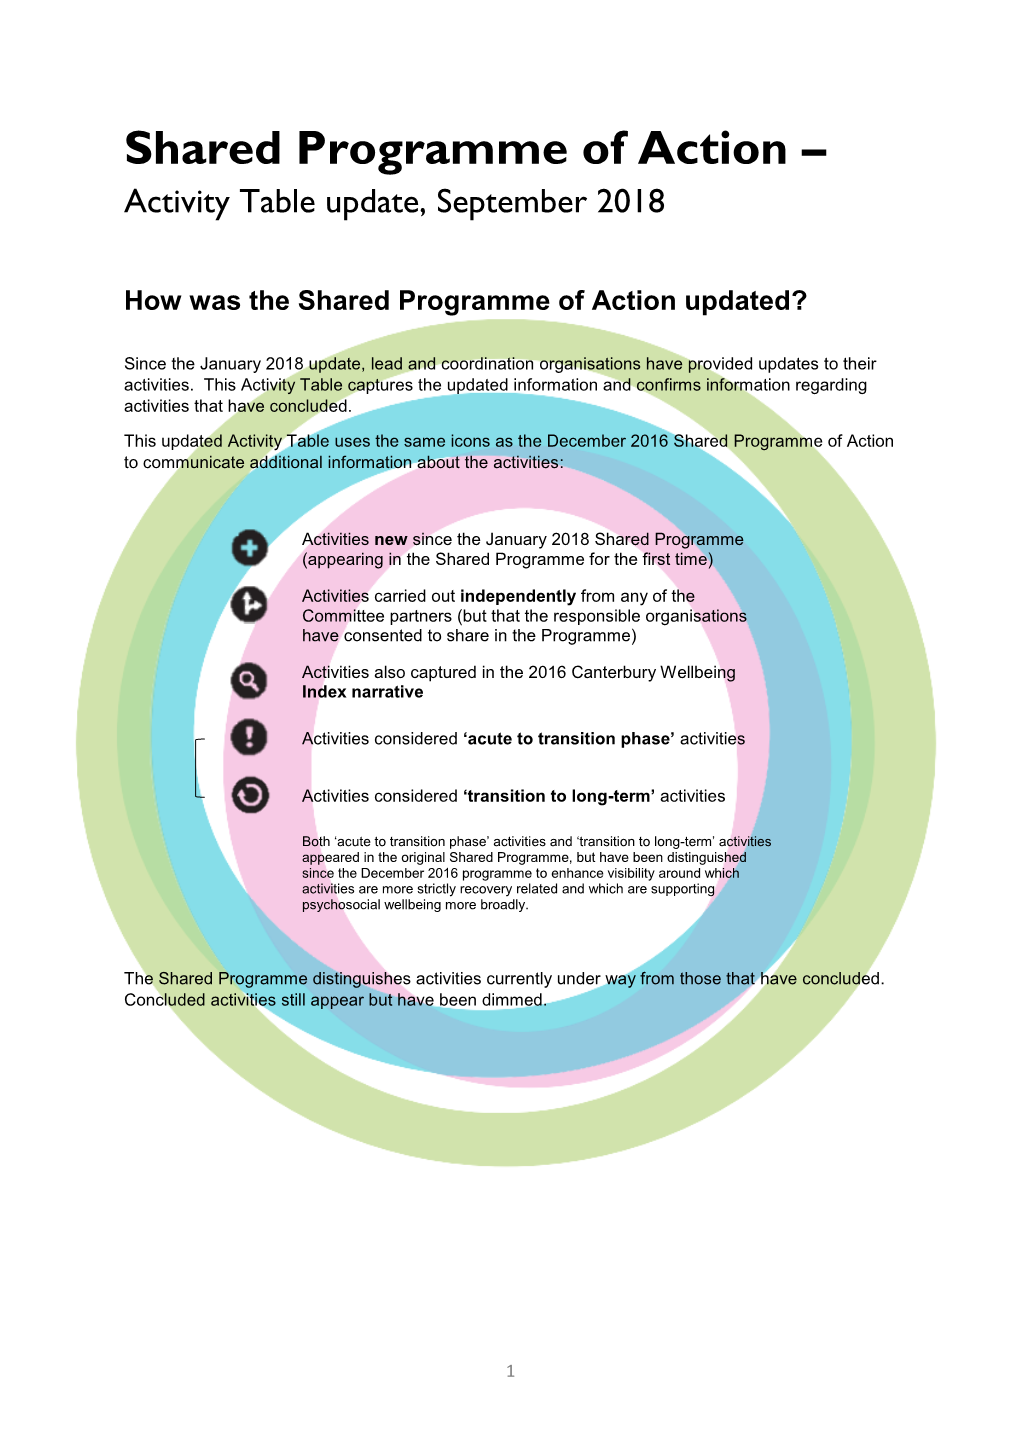 Community in Mind Shared Programme of Action: Activity Update